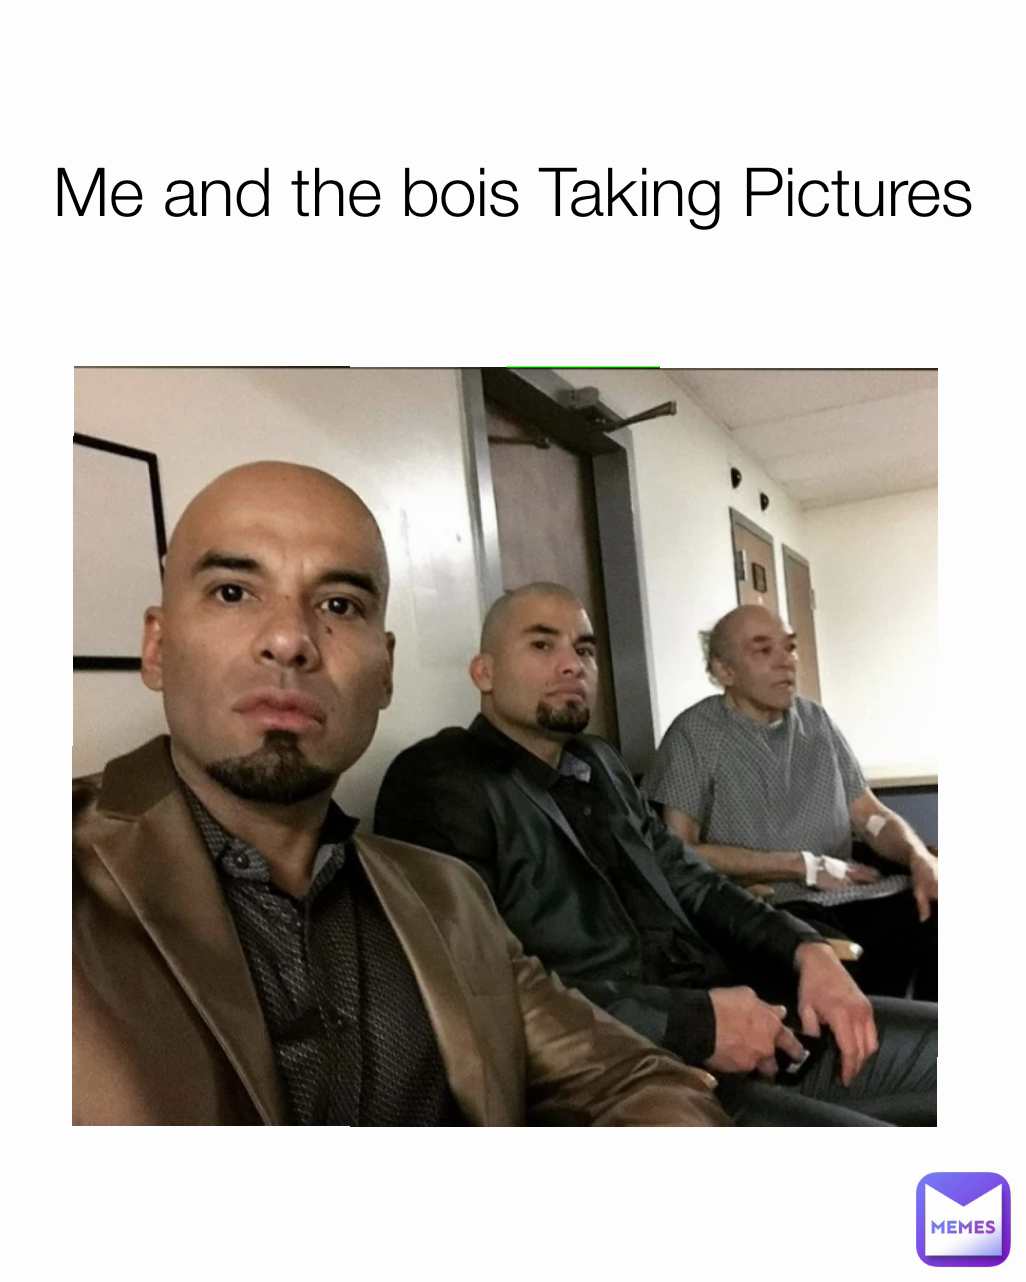 Me and the bois Taking Pictures